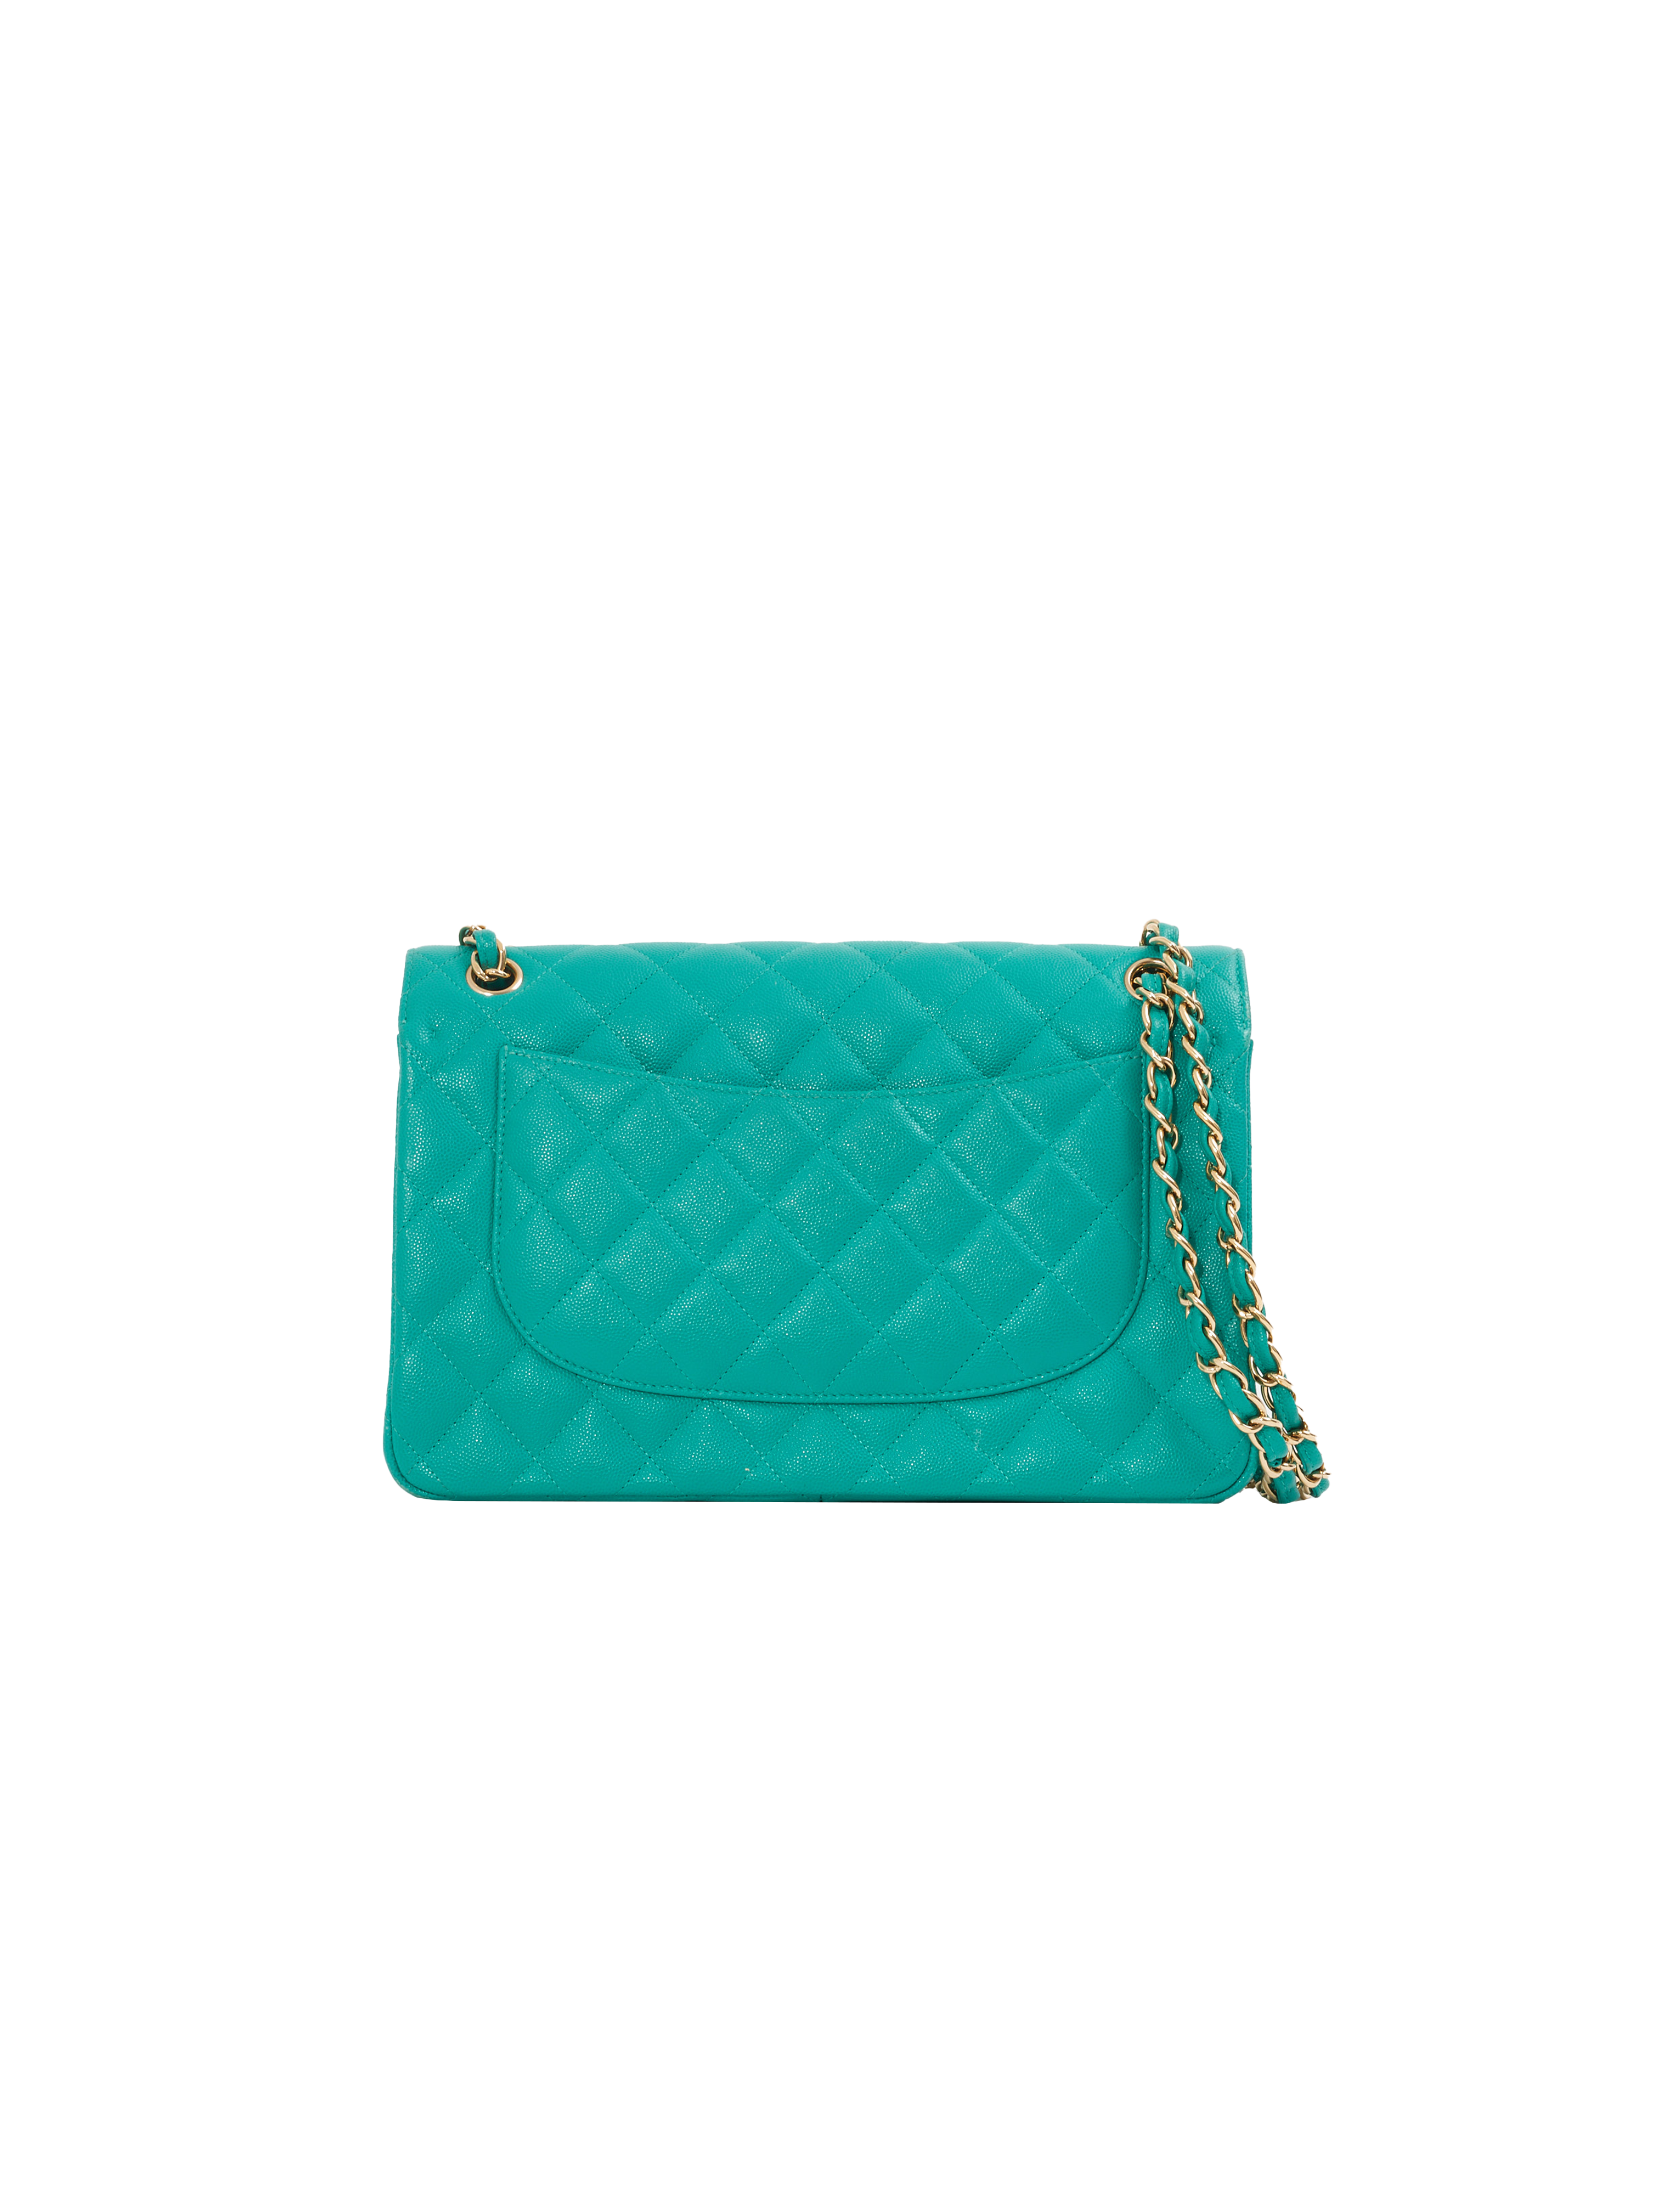 Chanel 2016 Turquoise Classic Flap Bag